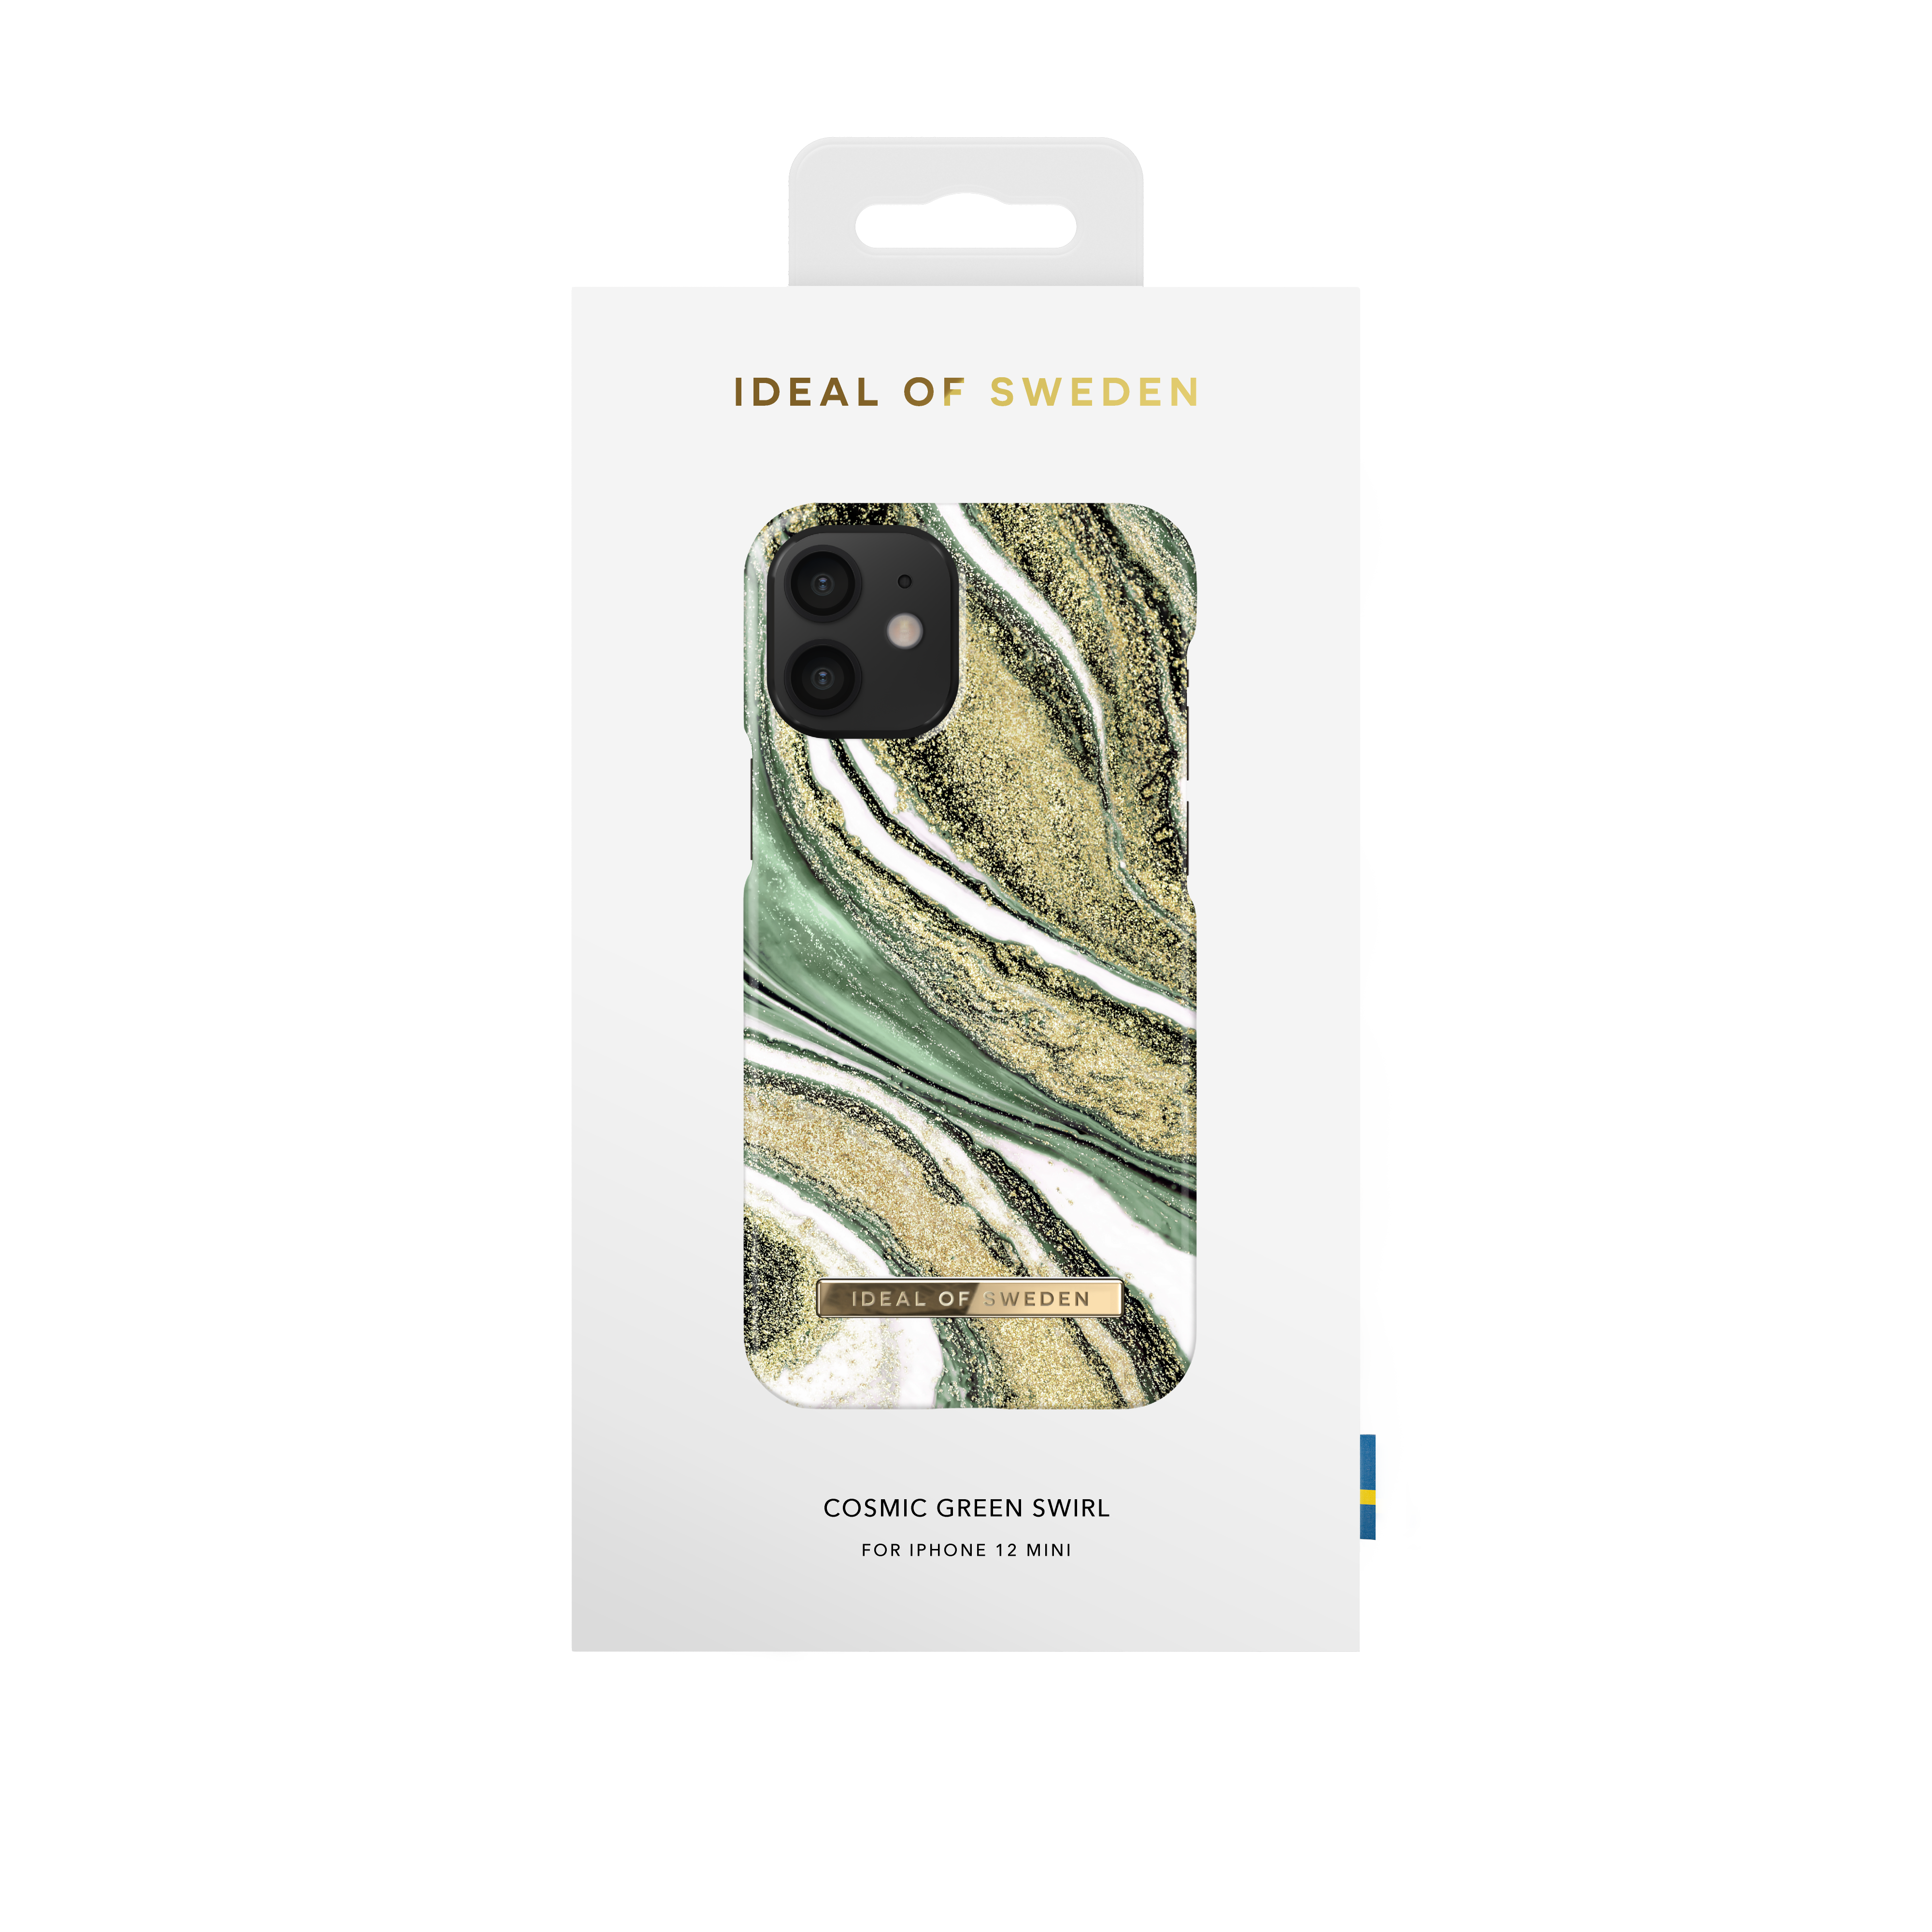 Mini, Green OF IPhone Swirl IDFCSS20-I2054-192, 12 SWEDEN IDEAL Cosmic Backcover, Apple,